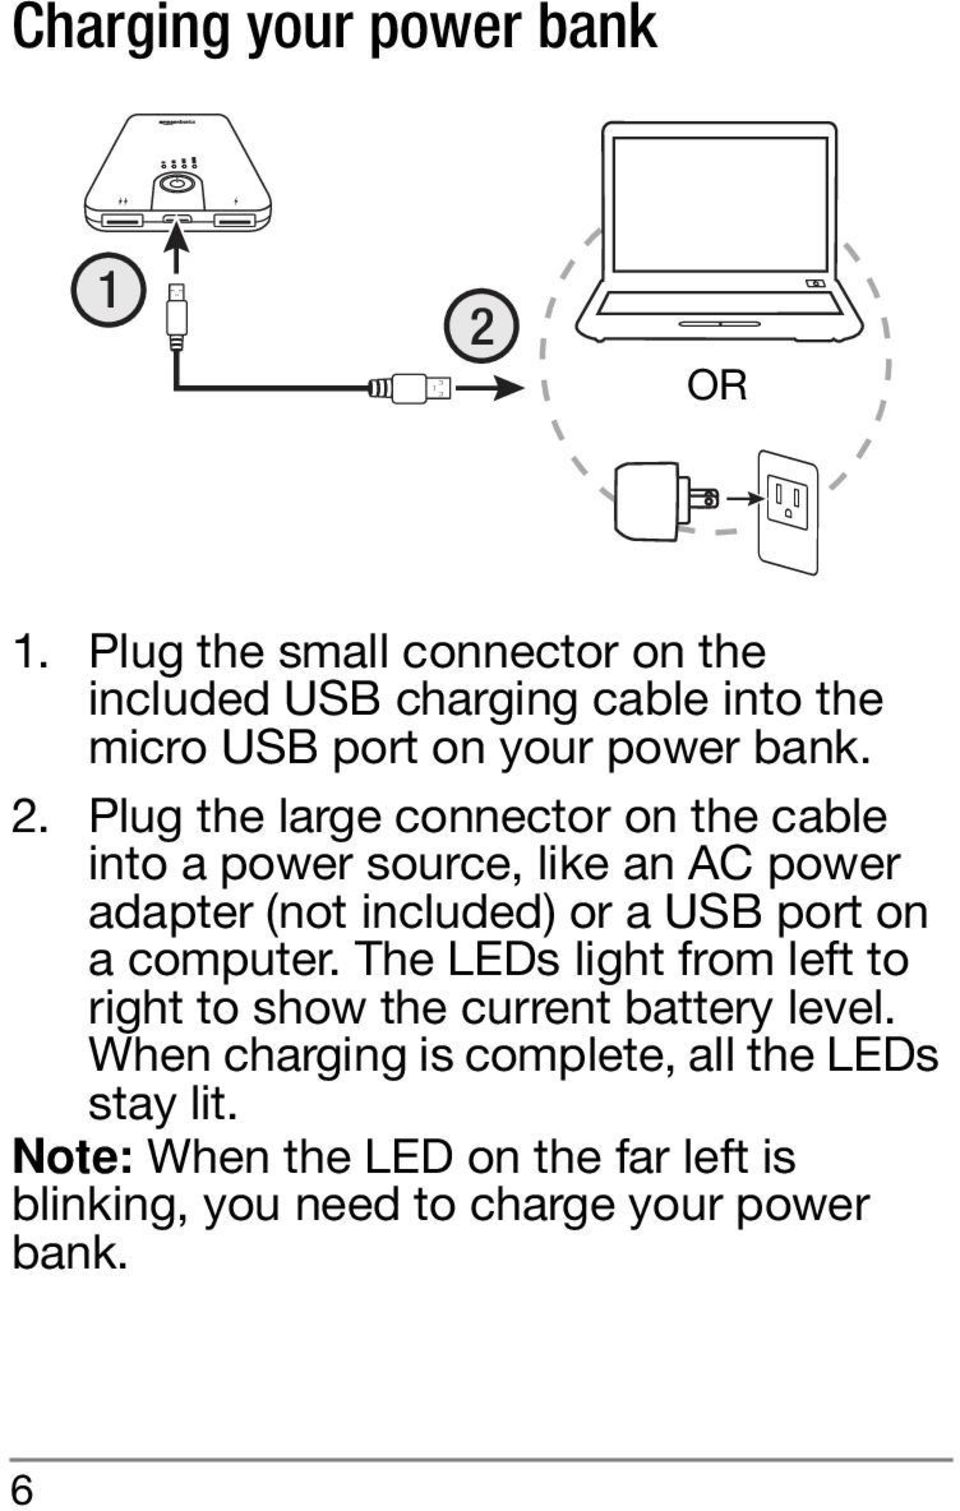 Plug the large connector on the cable into a power source, like an AC power adapter (not included) or a USB port on a